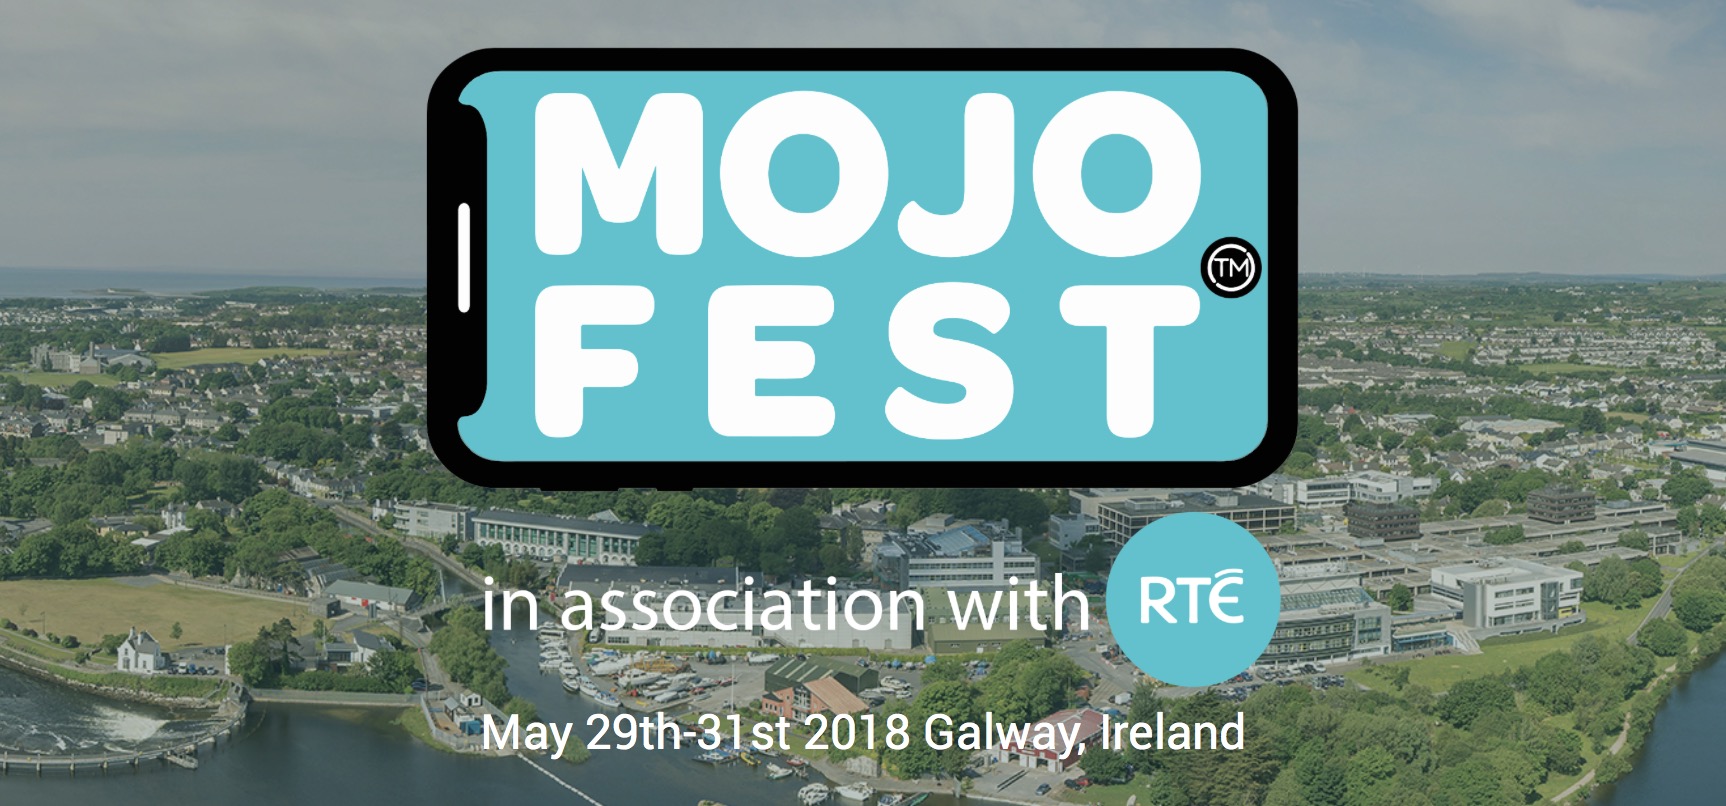 Aerial view of Galway Ireland, promoting MojoFest 2018, in association with RTÉ, held from May 29-31.